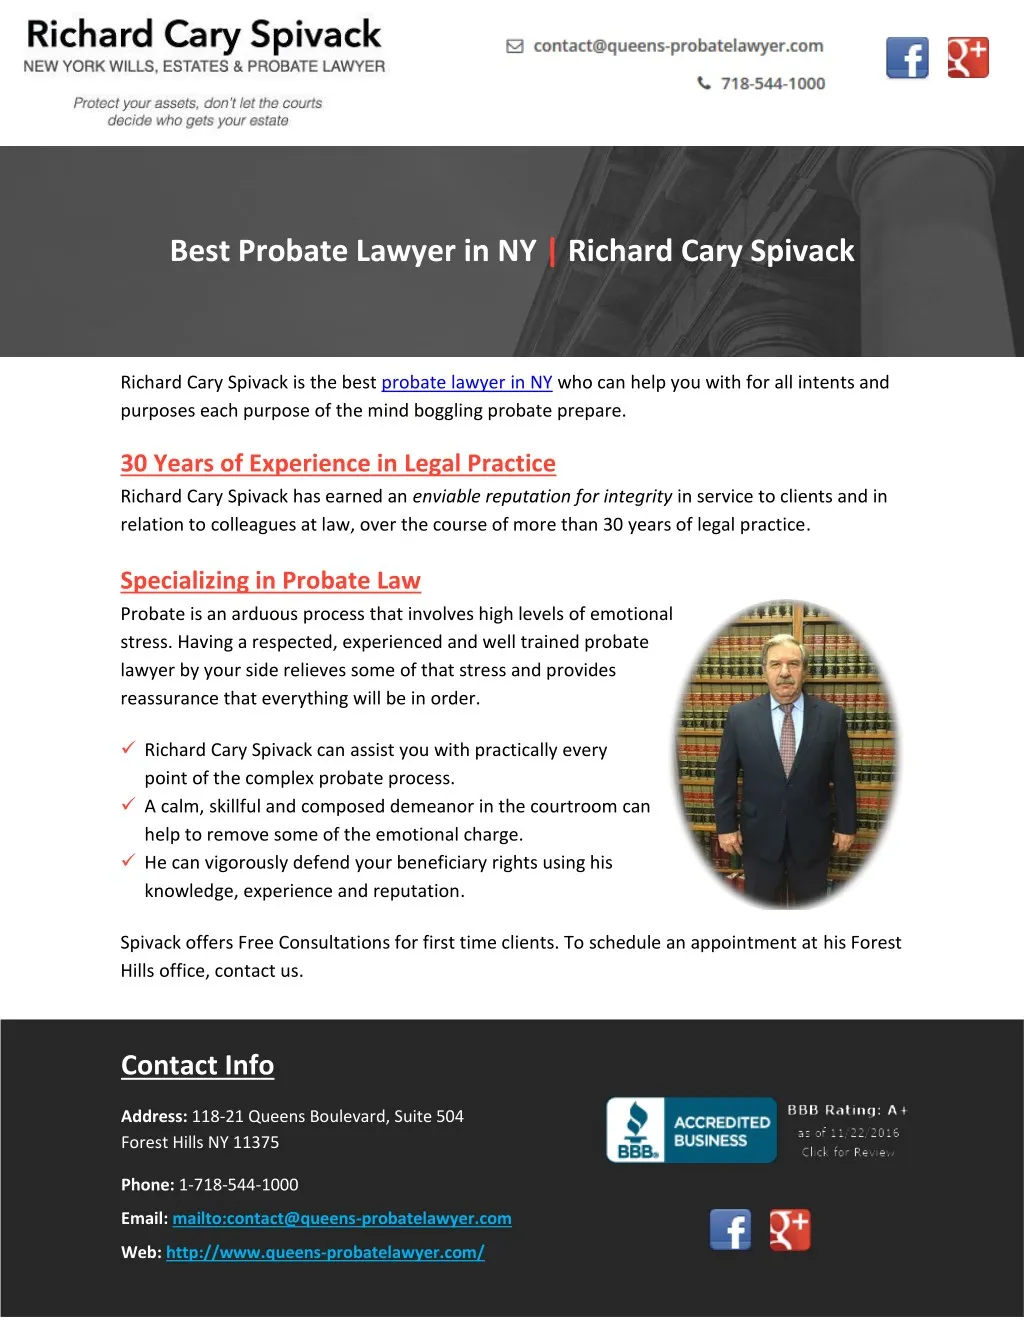 richard cary spivack is the best probate lawyer